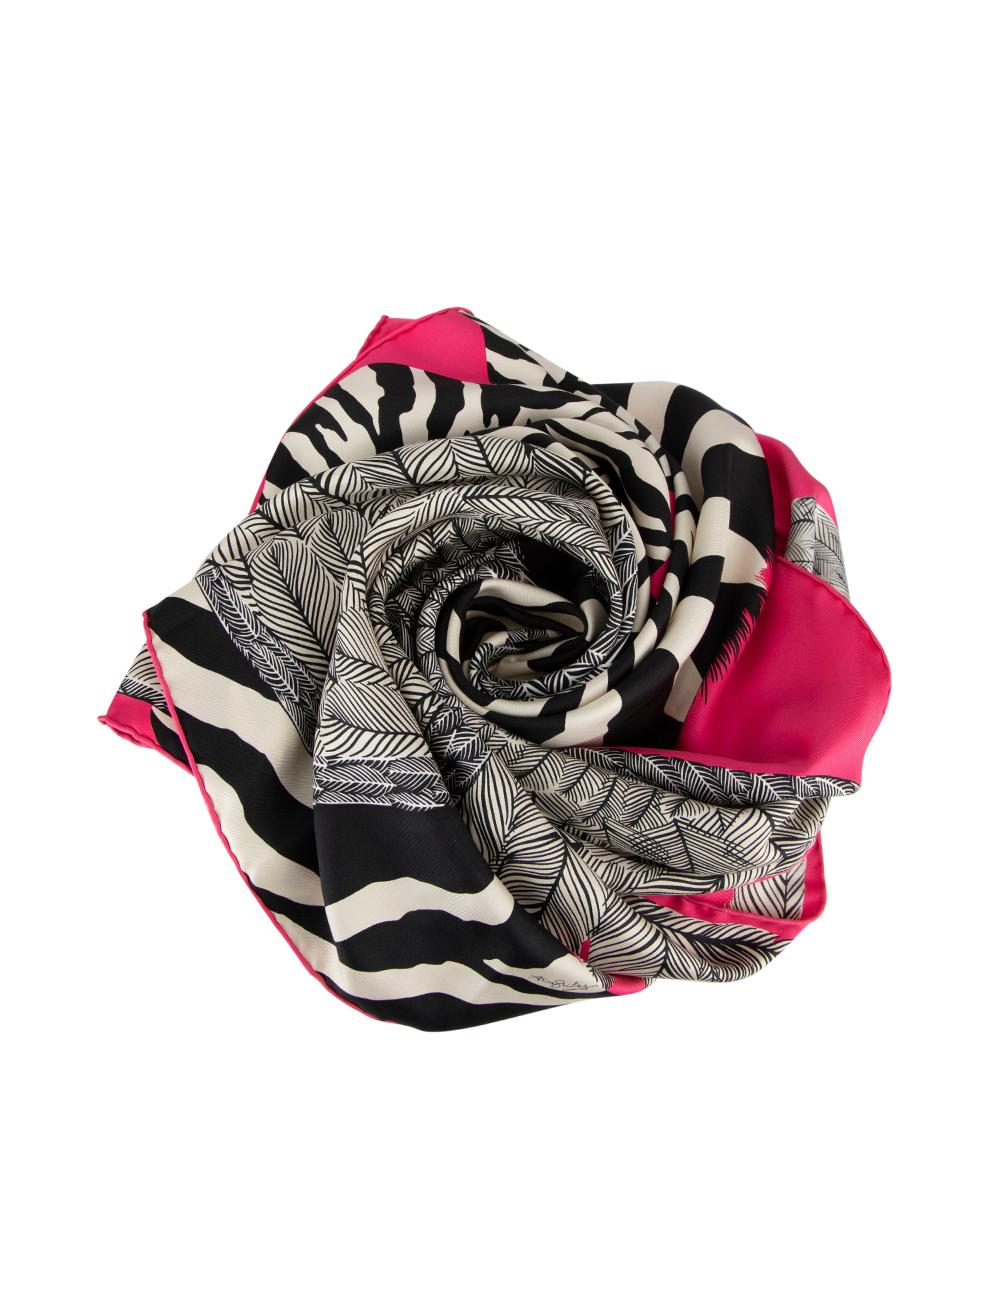 CONDITION is Very good. Minimal wear to scarf is evident. Minimal wear to the front with marks on this used Hermès designer resale item.



Details


Pink

Silk

Square scarf

Zebra pegasus printed





Made in France



Composition

100%